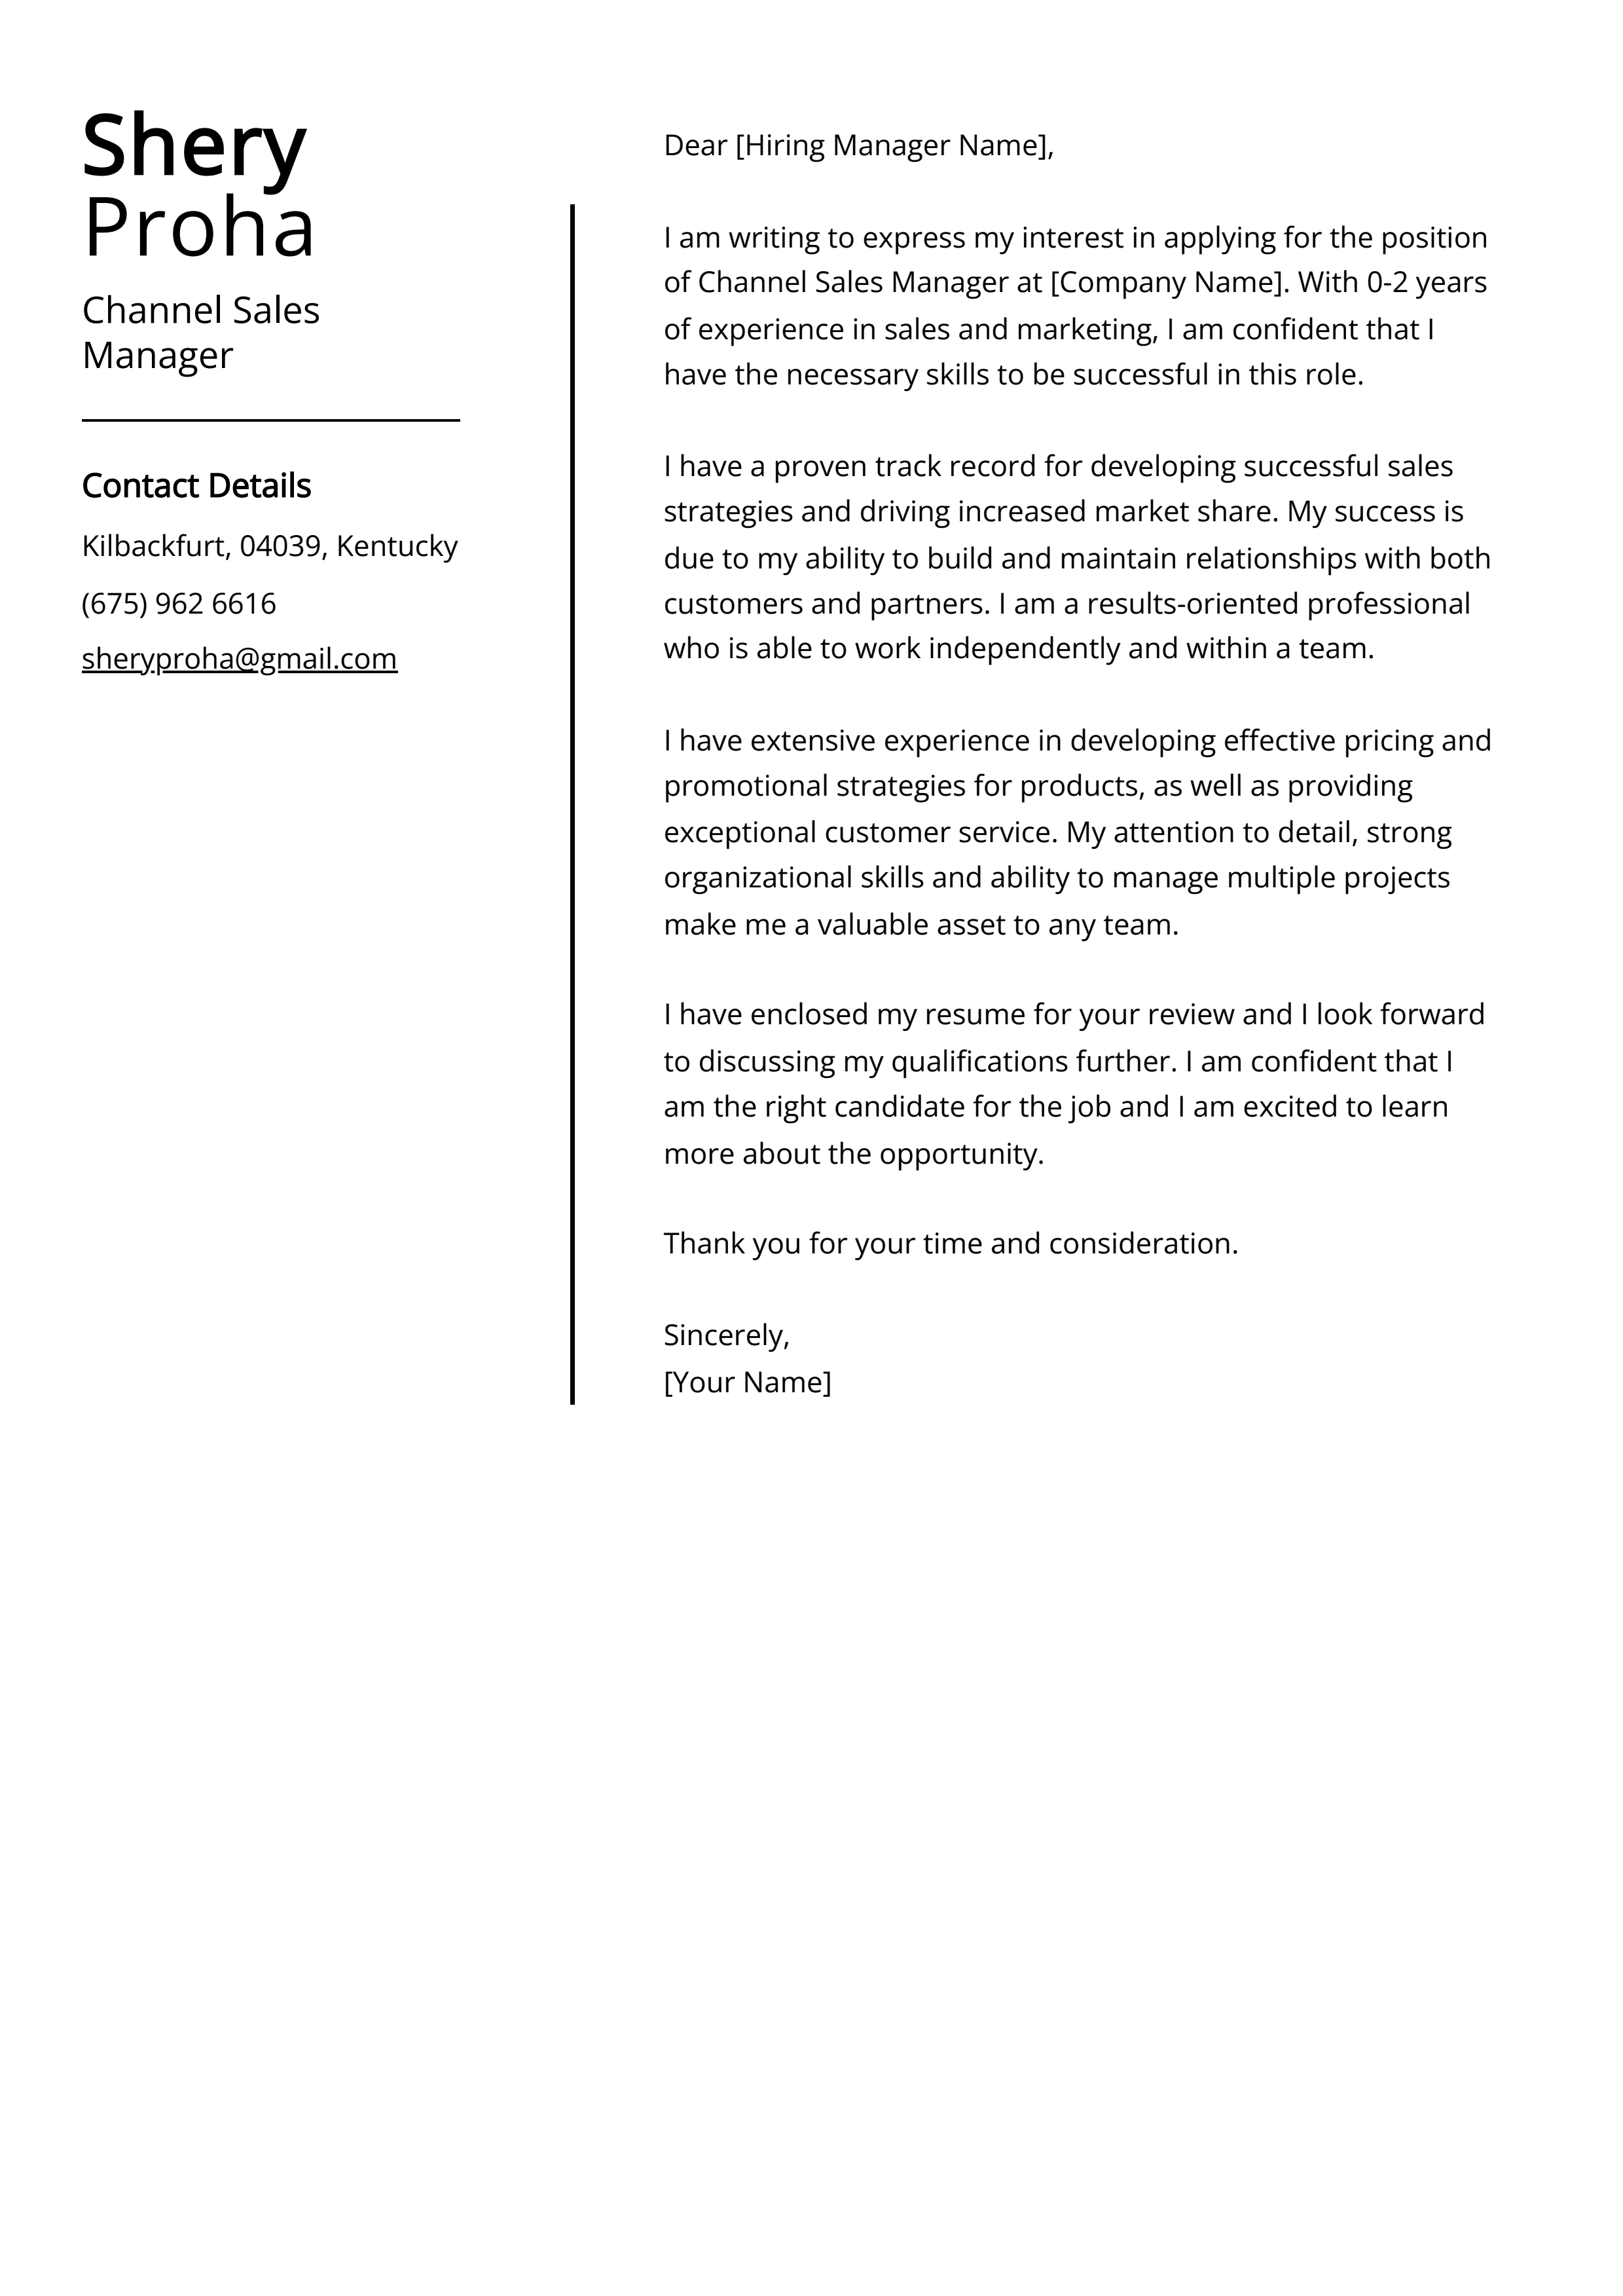 Channel Sales Manager Cover Letter Example